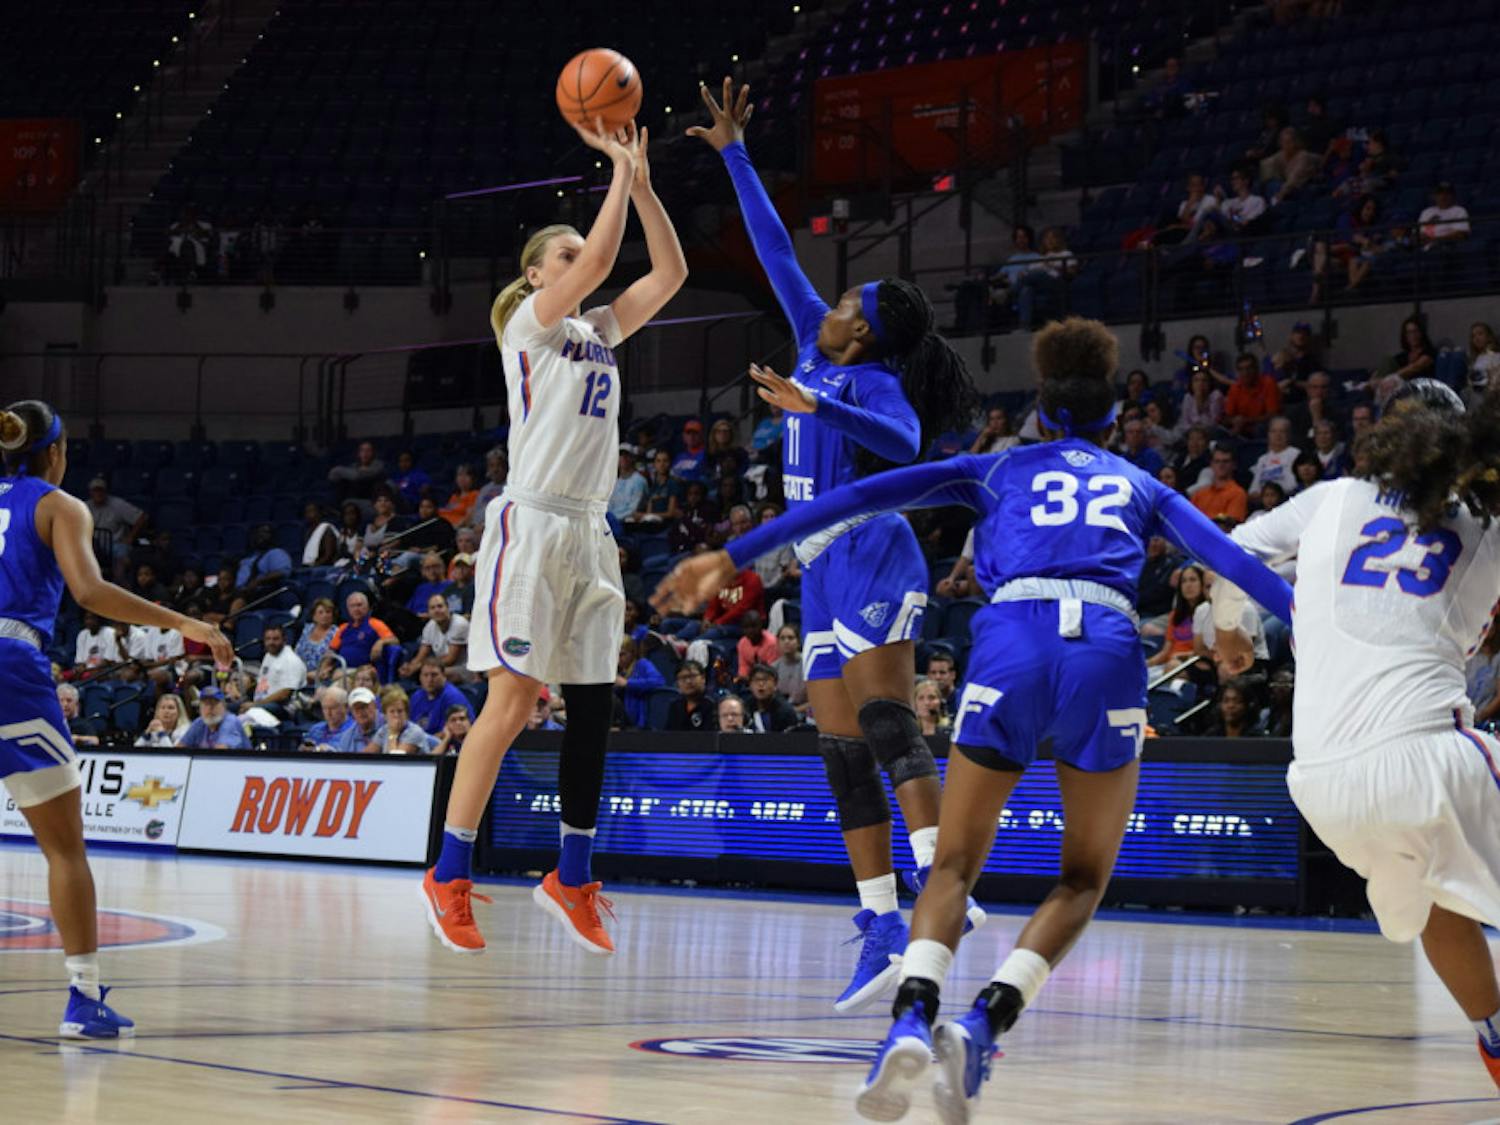 UF guard Paulina Hersler converted 3-of-5 attempts from beyond the arc in Florida's 82-66 against Georgia State on Saturday.